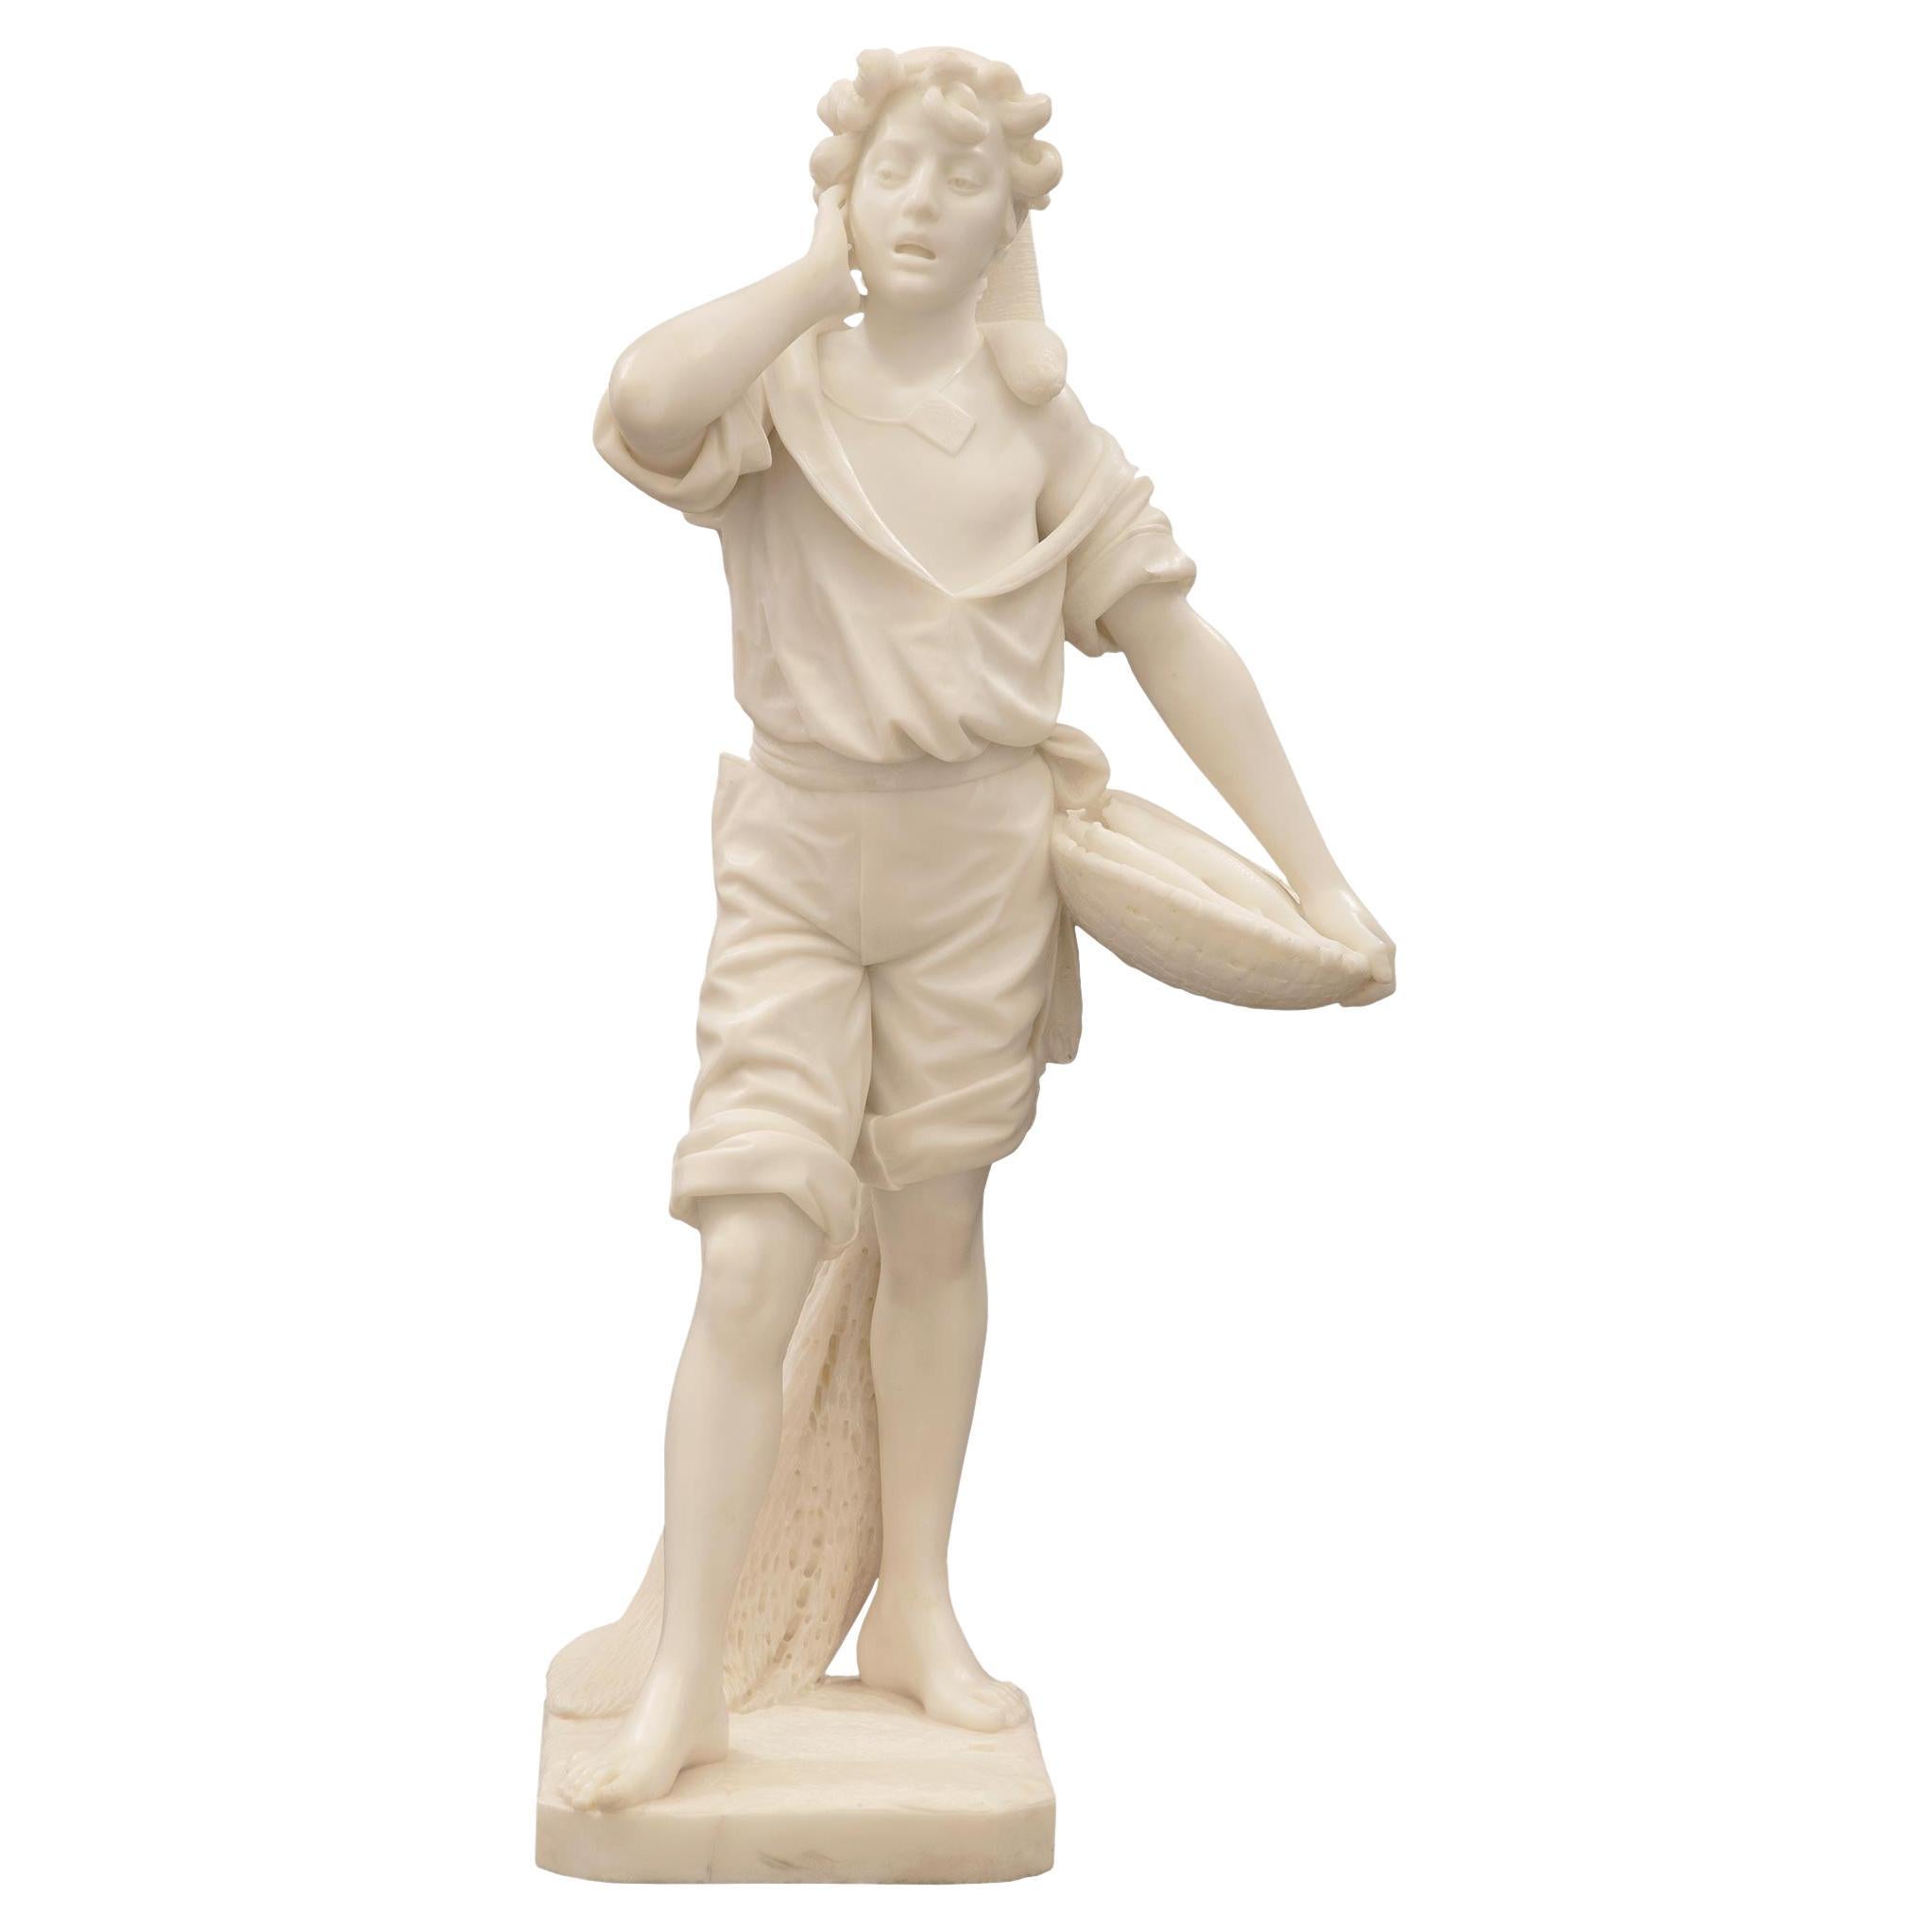 Italian 19th Century Solid White Carrara Marble Statue of a Young Fisherman